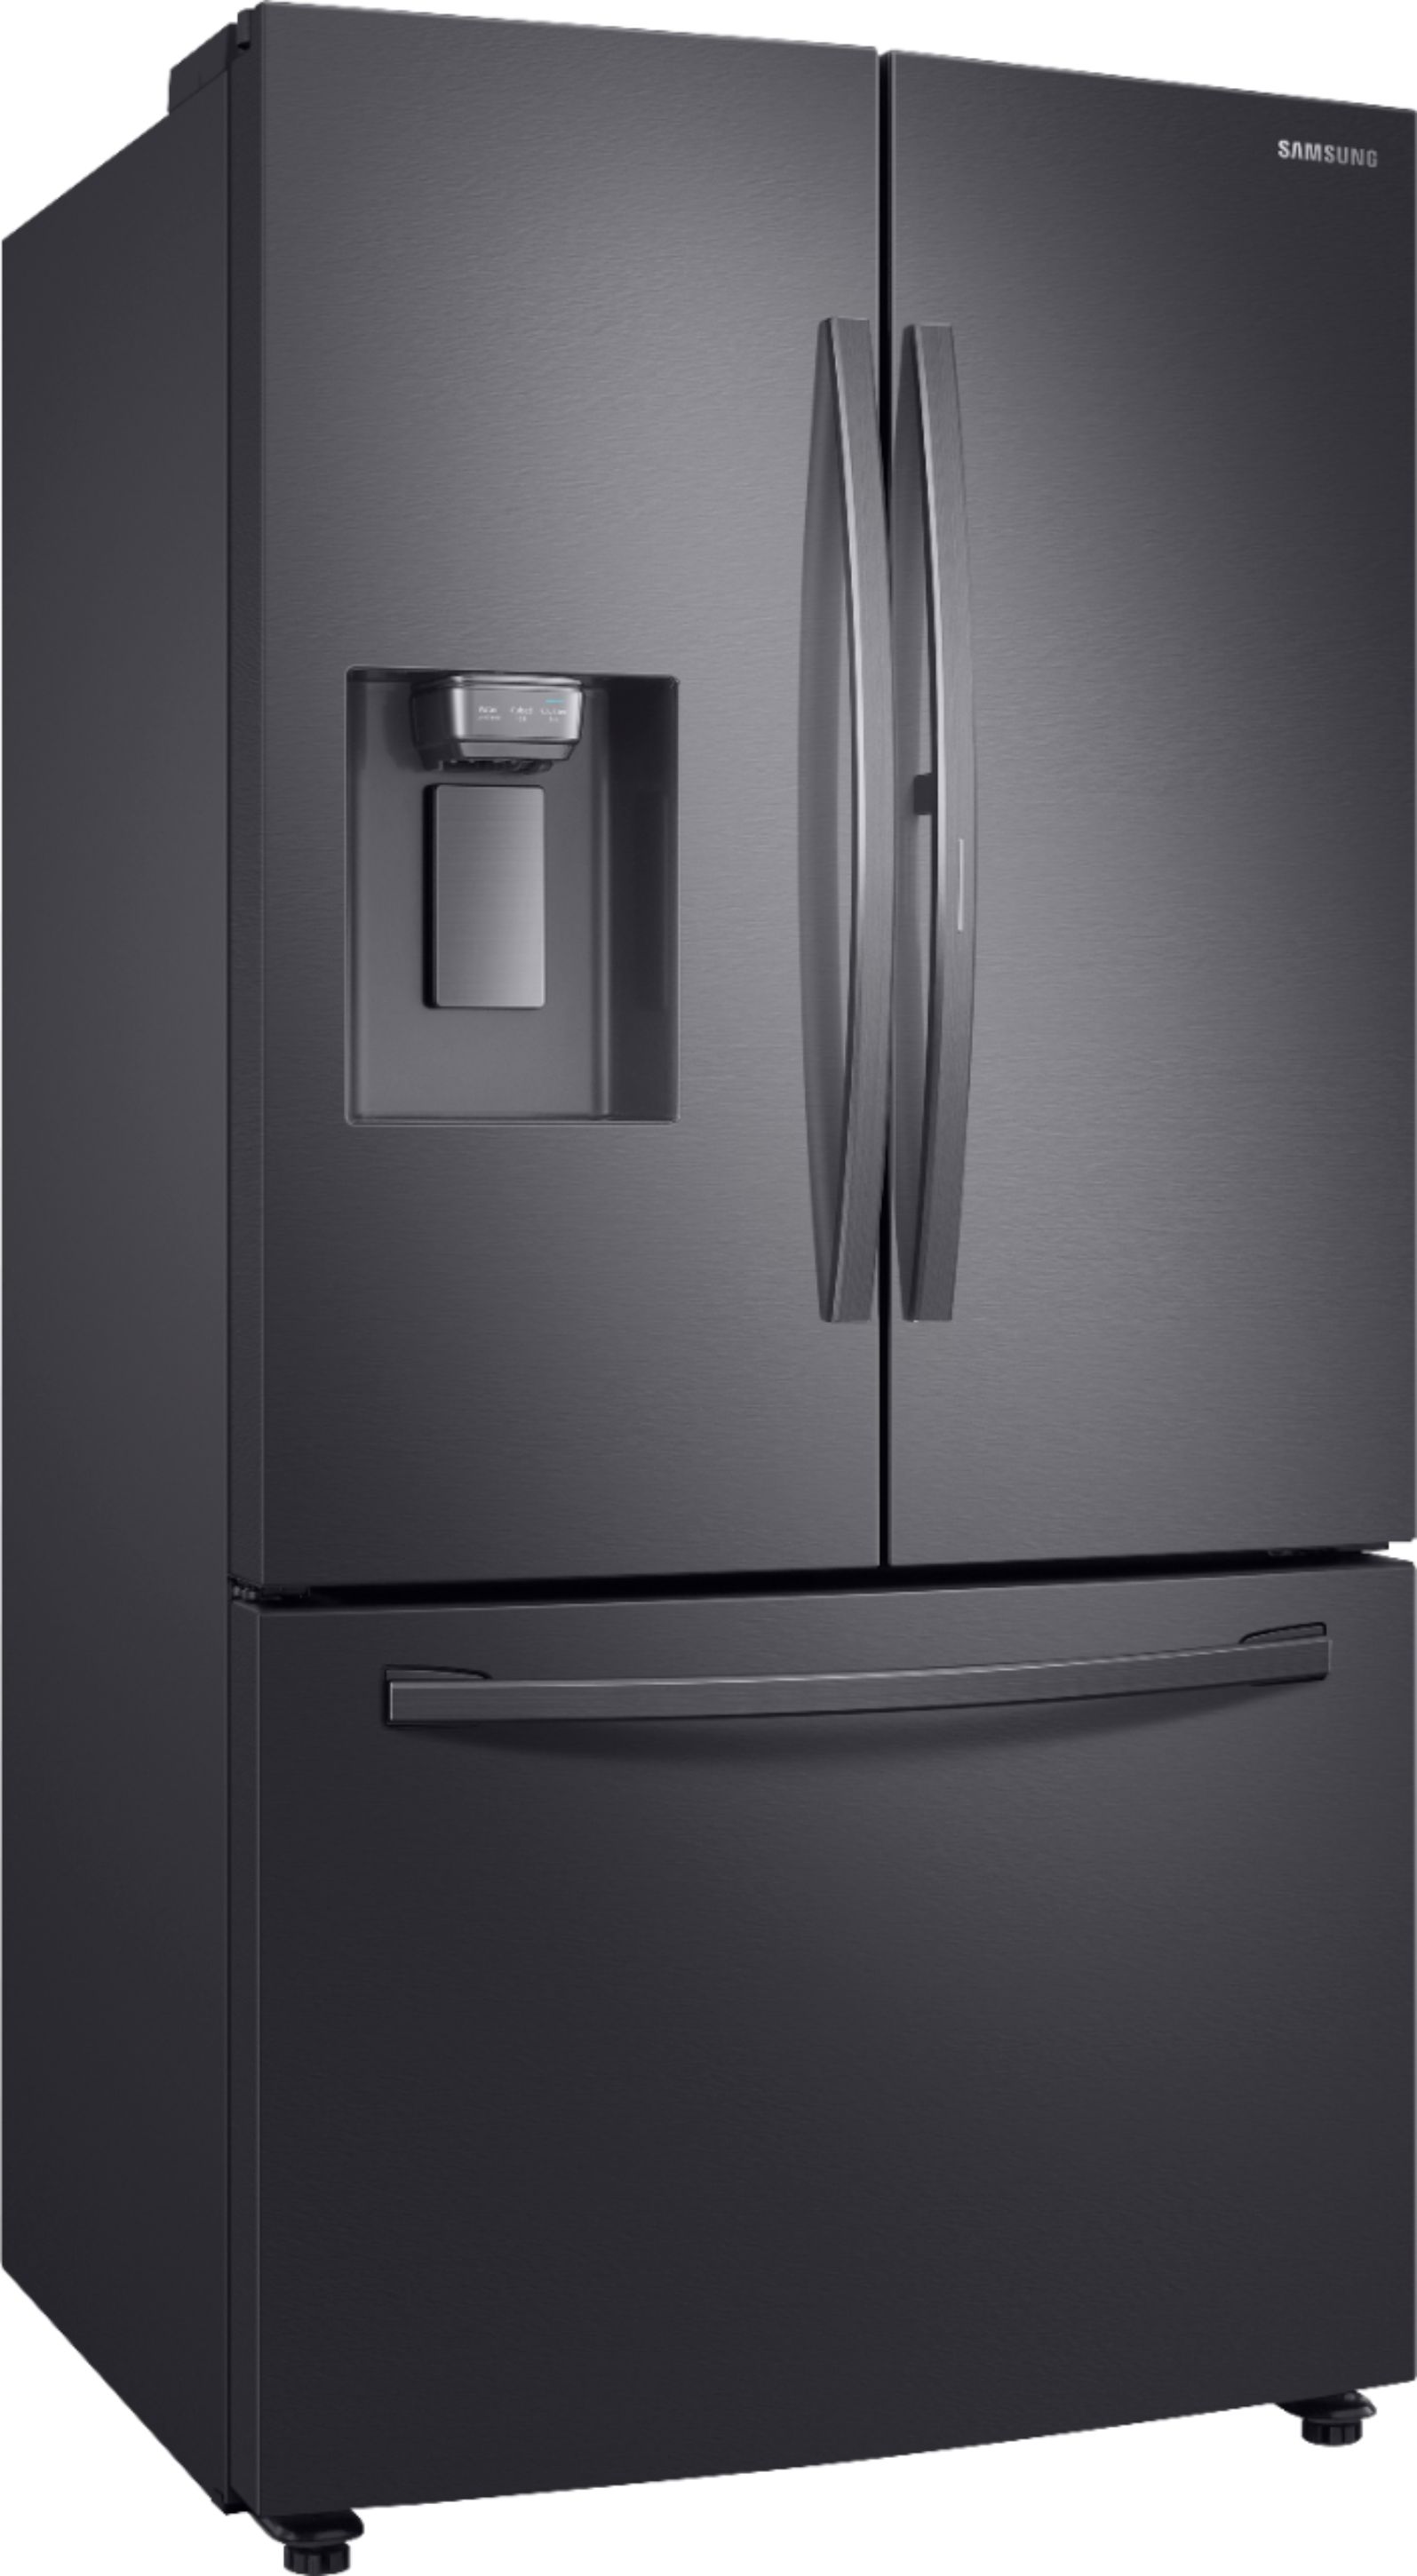 Angle View: Samsung - 27.8 Cu. Ft. French Door  Fingerprint Resistant Refrigerator  with Food Showcase - Black stainless steel